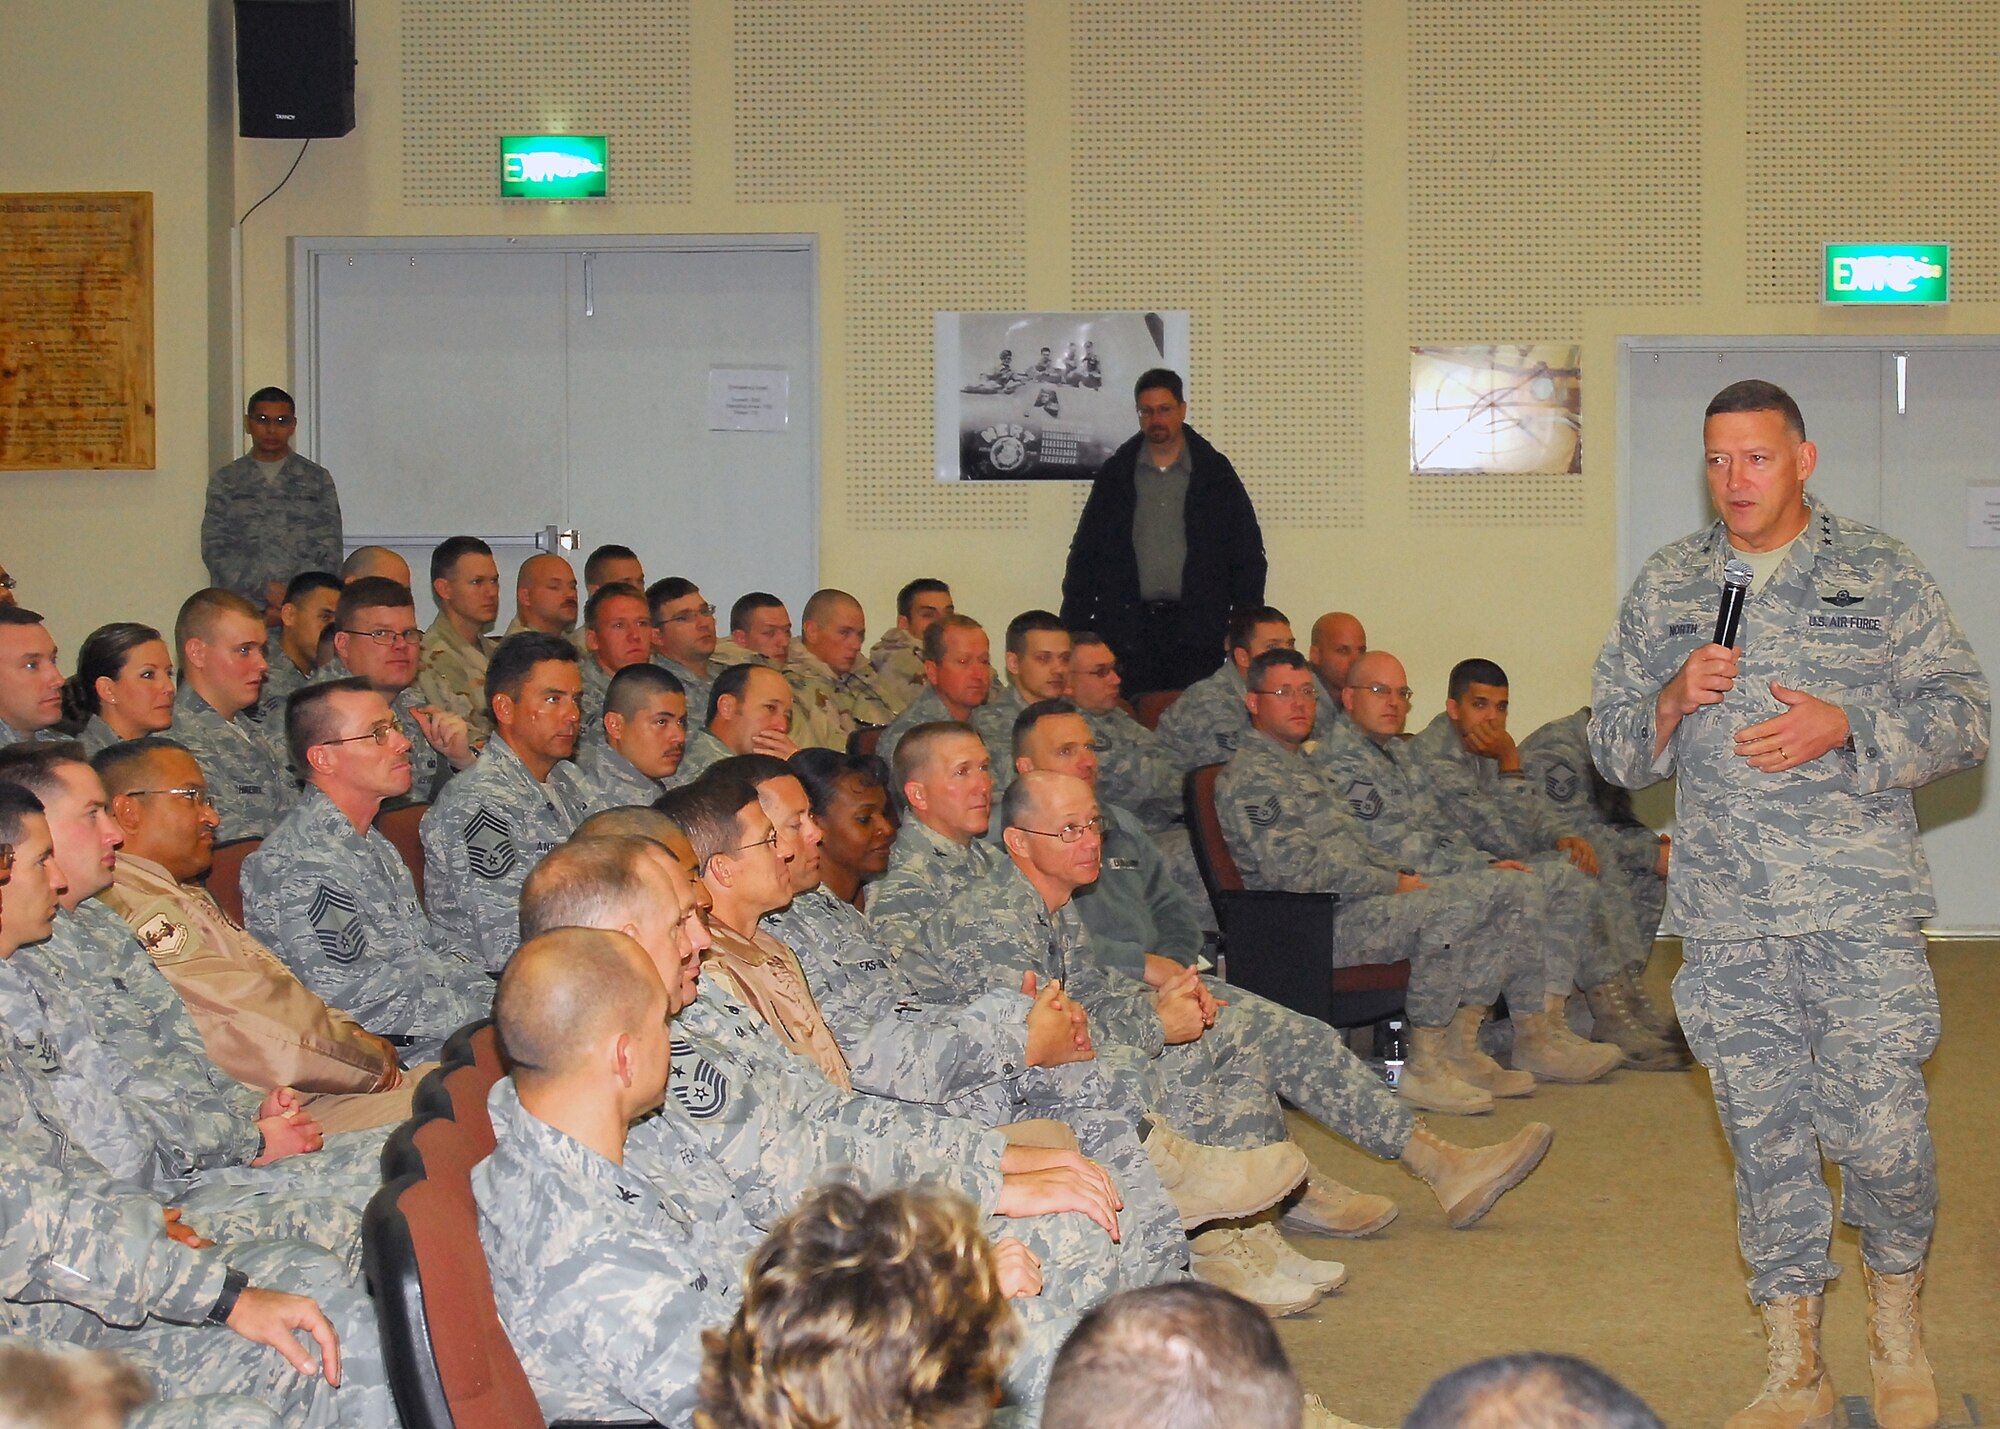 SOUTHWEST ASIA -- Lt. Gen Gary North, Air Forces Central Commander, talks with airmen of the 386th Air Expeditionary Wing on Dec. 22 at an air base in Southwest Asia. General North discussed current Air Force issues affecting airmen in the U.S. Central Command Area of Responsibility. (U.S. Air Force photo/Capt. Suzanne VanderWeyst)